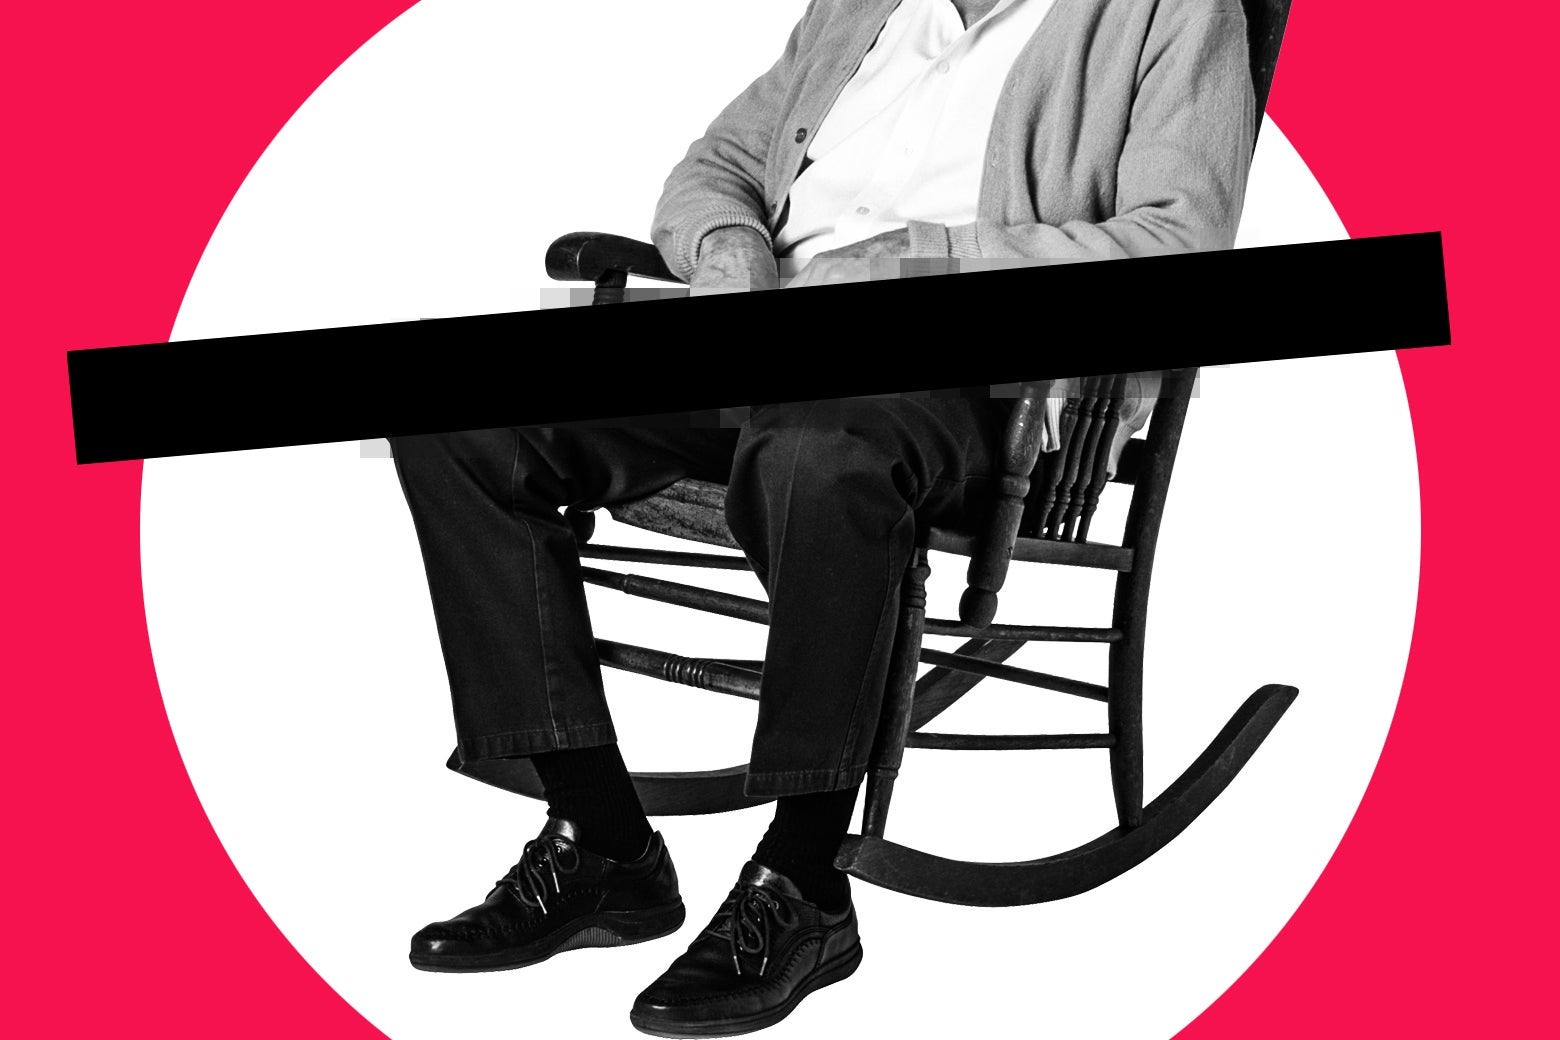 A man sits in a rocking chair. There is a black bar over his lap.